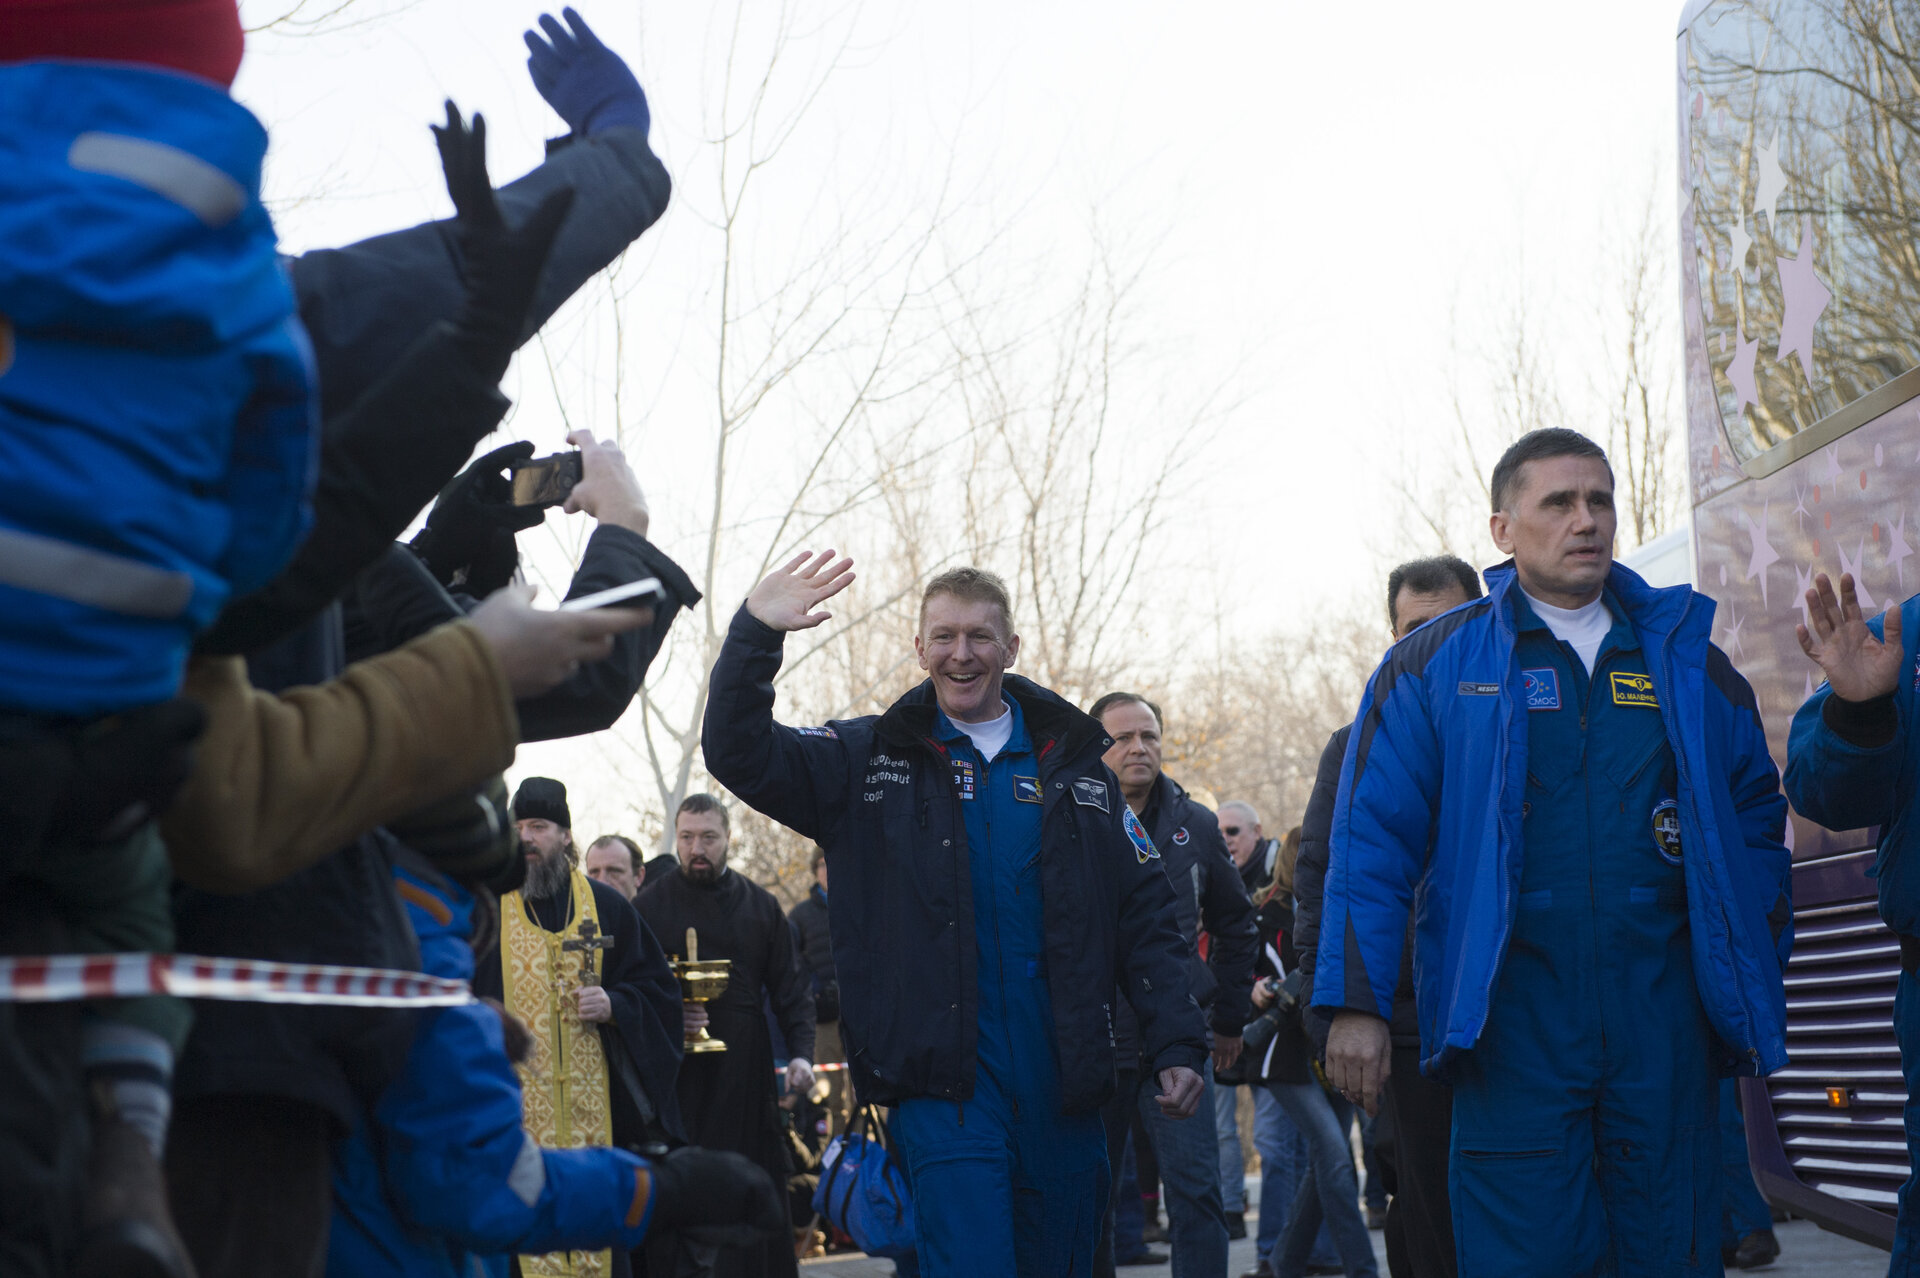 Tim Peake waves farewell to family and friends